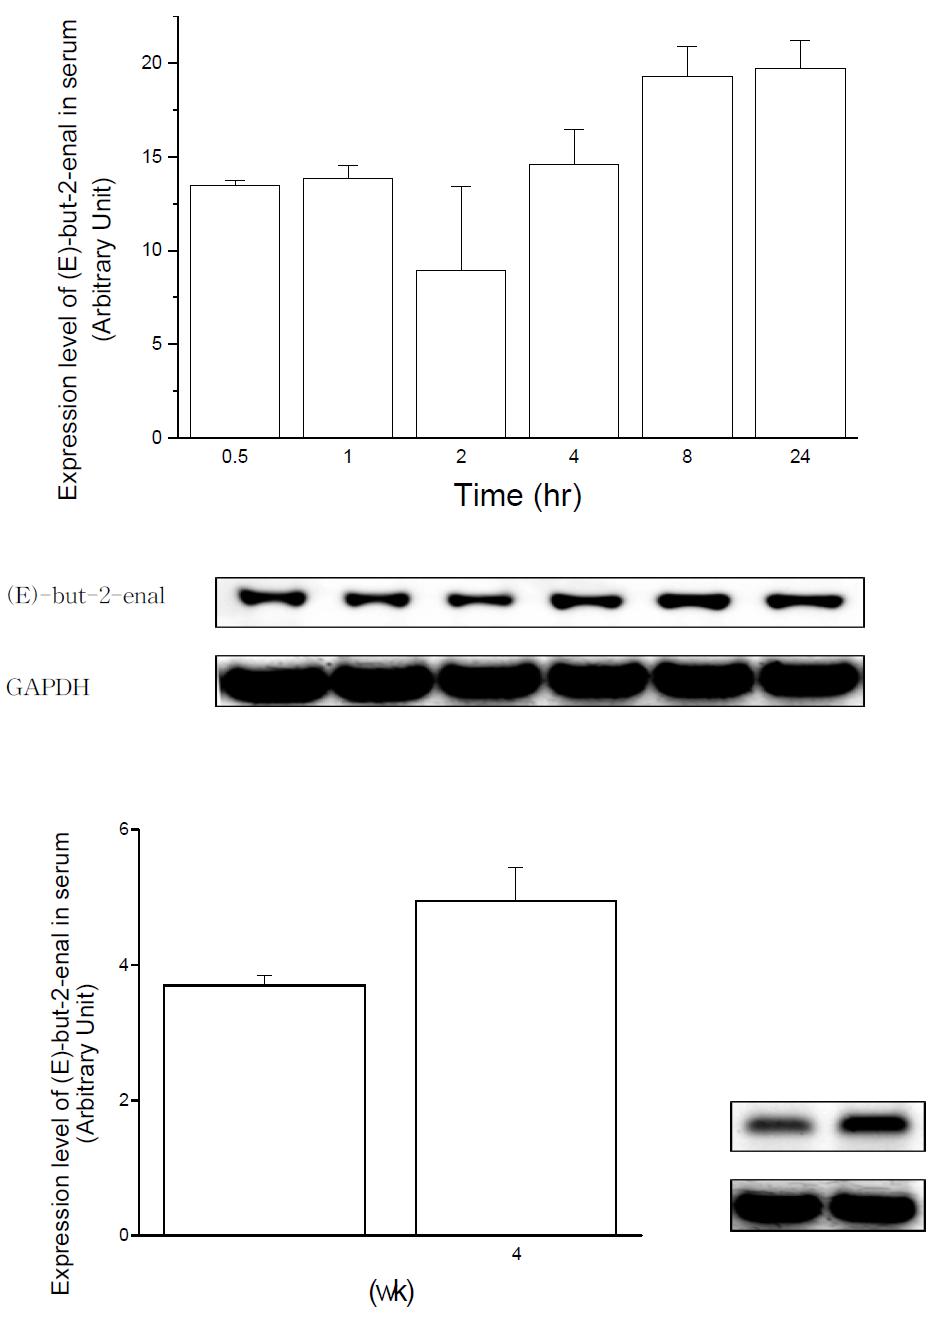 Expression level of (E)-hex-2-enal in rat serum after oral administration of HNE.